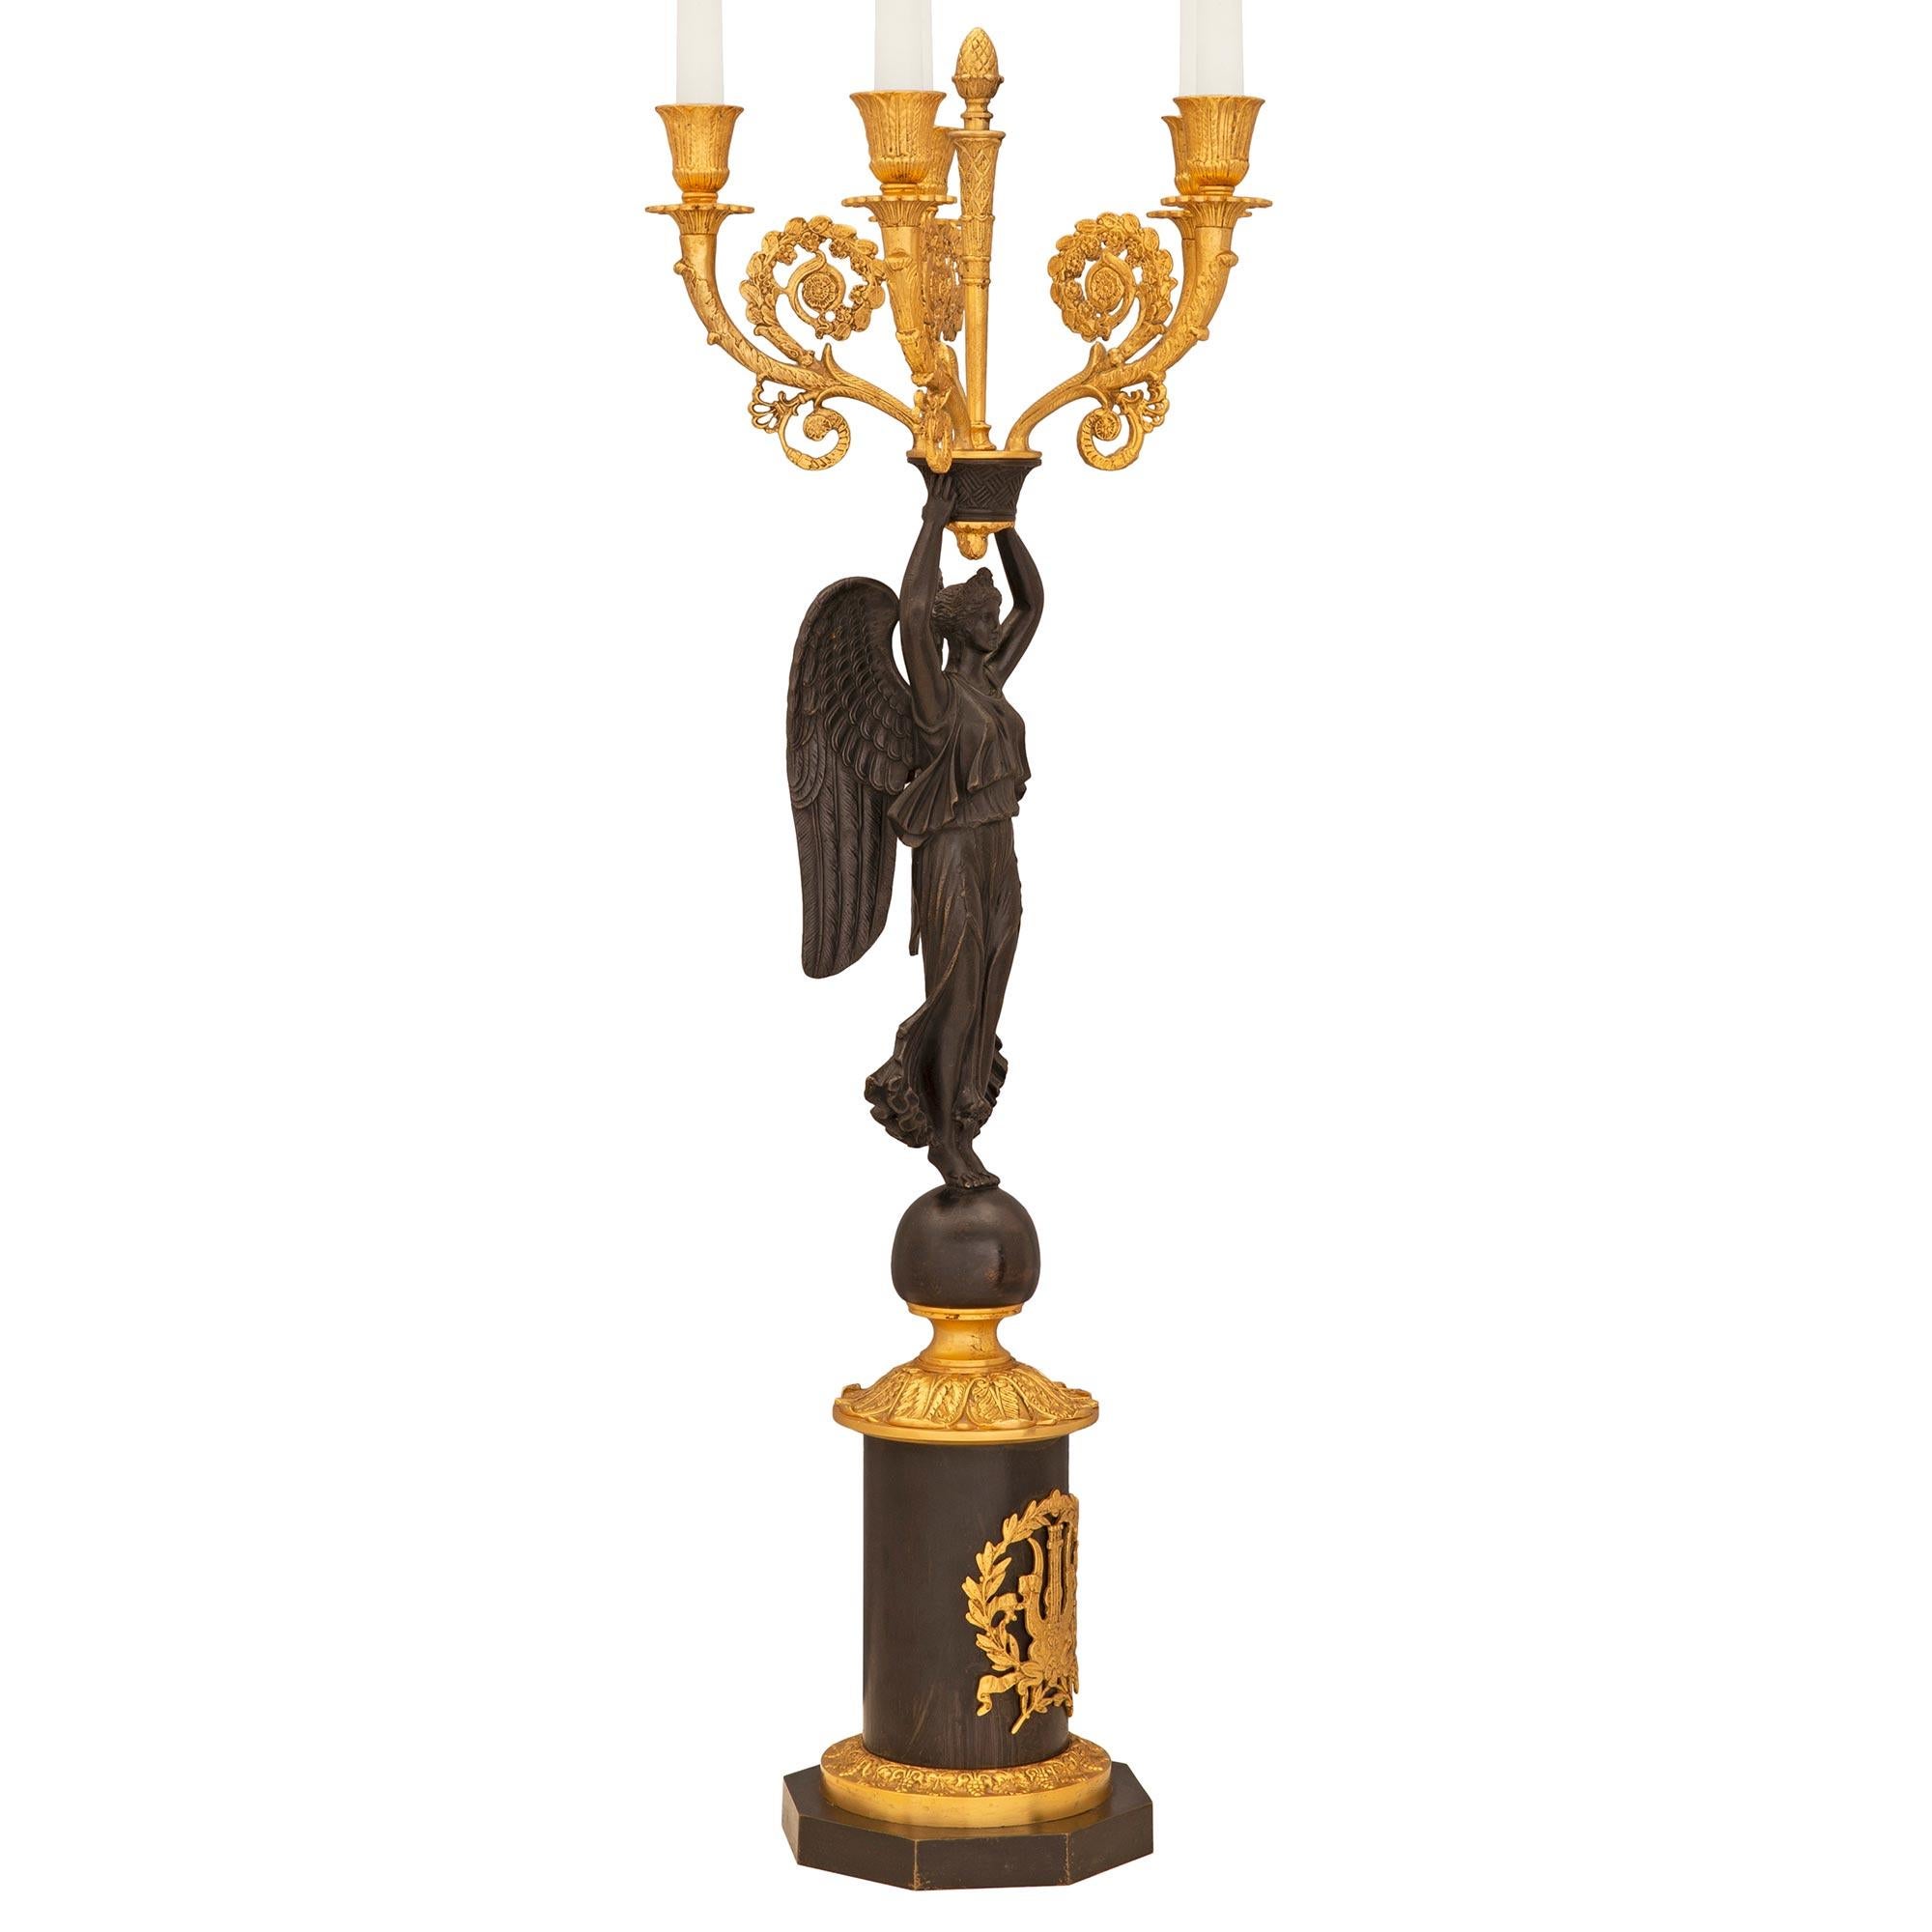 A very attractive and large pair of French 19th century Neo-Classical st. five arm candelabras. The pair in ormolu and patinated bronze are raised on a circular base with a chiseled ormolu decoration in the center below a female figure with wings